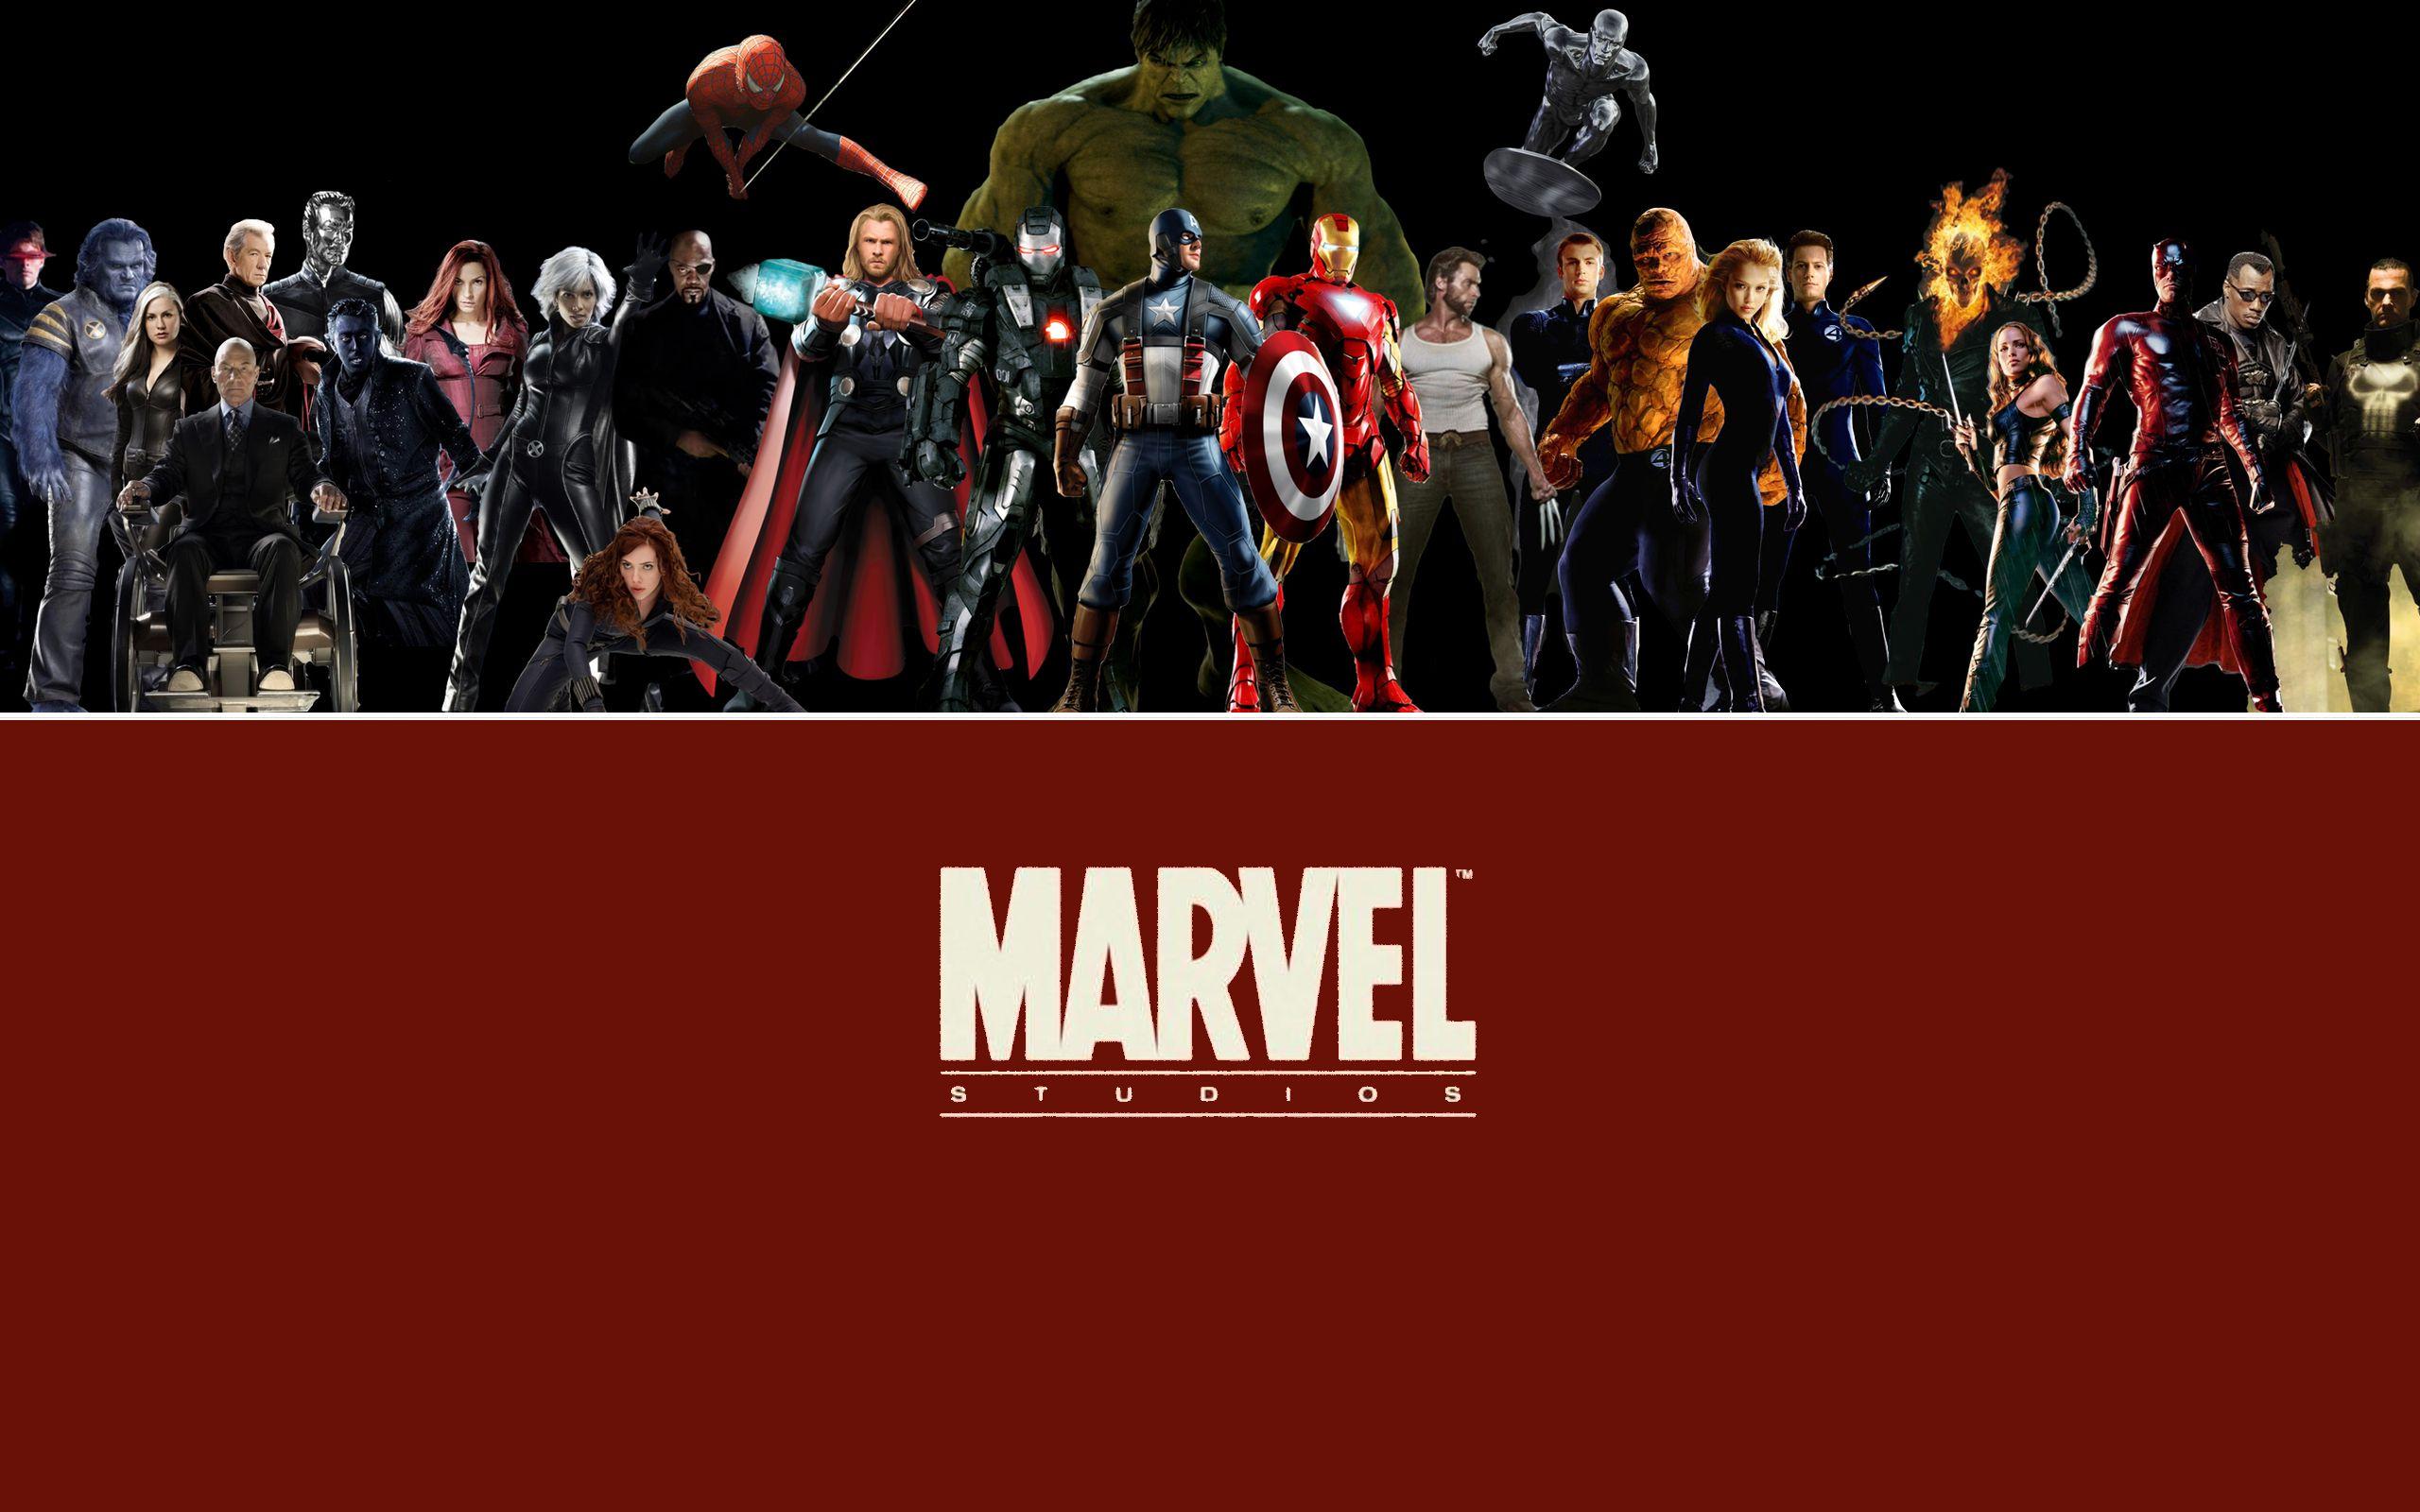 Two Untitled Marvel Movies Announced!